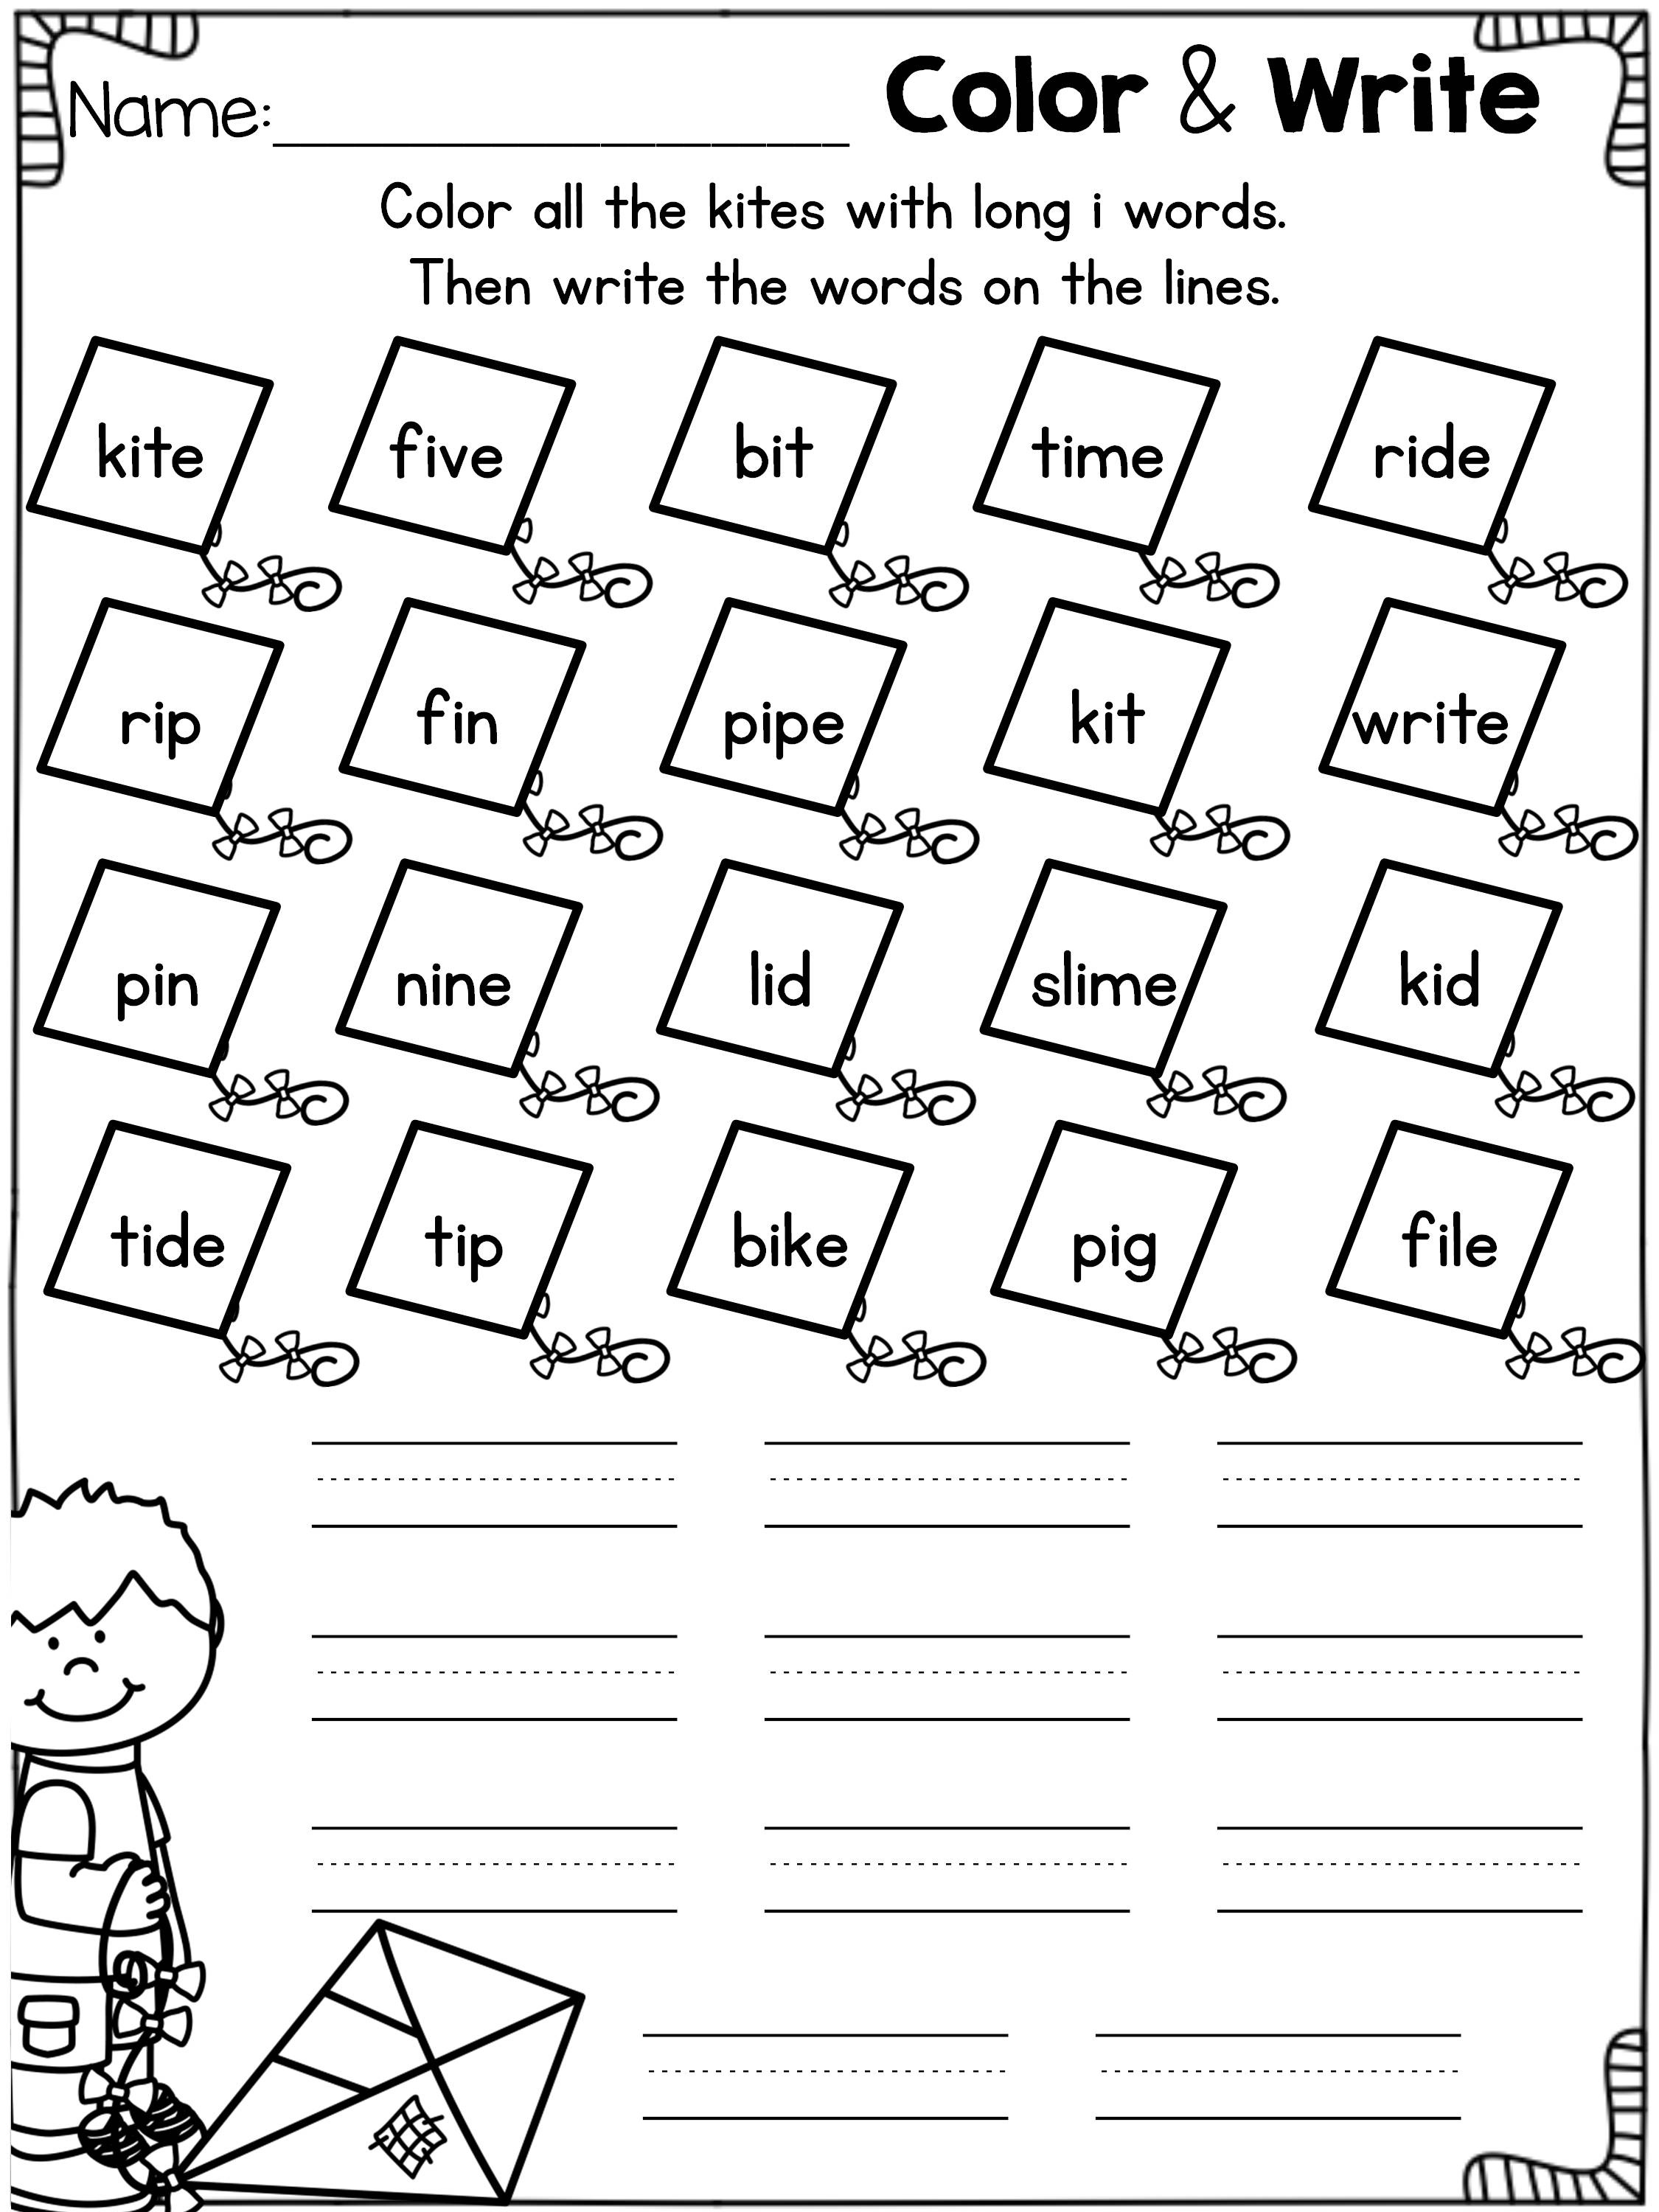 Kindergarten: 2Nd Grade Math Worksheets Word Problems Starfall Play - Free Printable Activity Sheets For 2Nd Grade